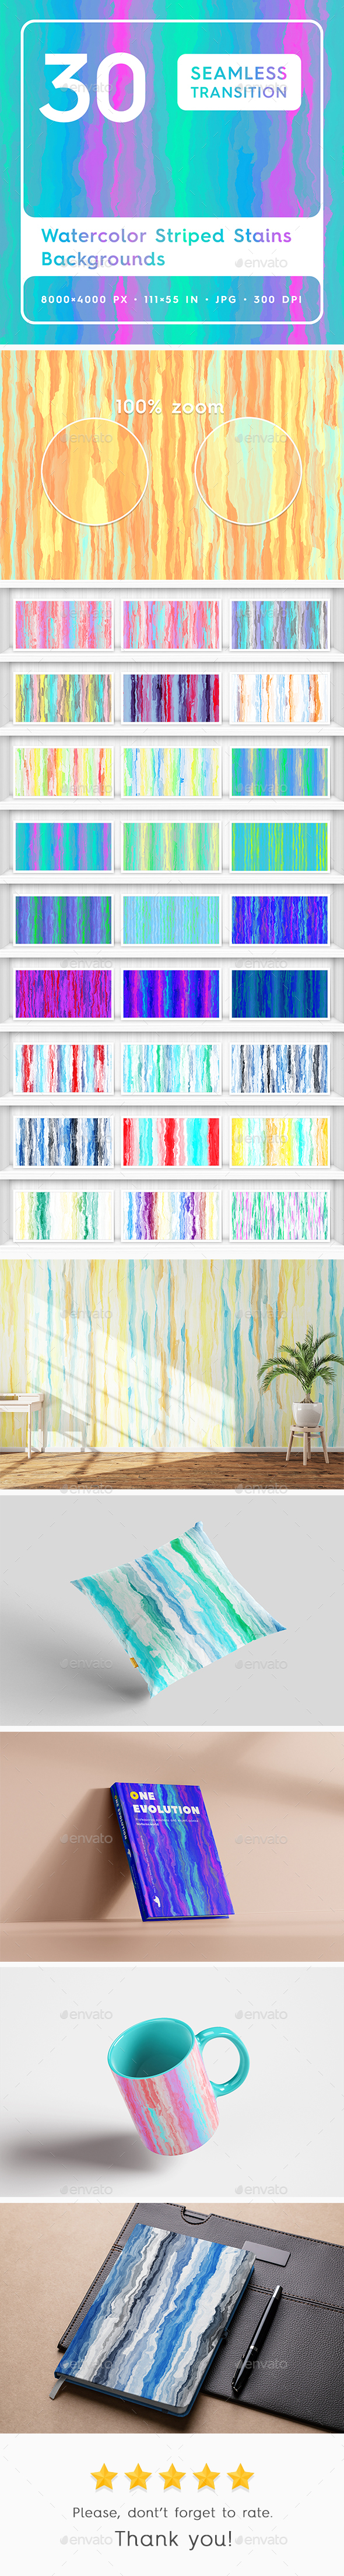 40 Watercolor Striped Stains Backgrounds